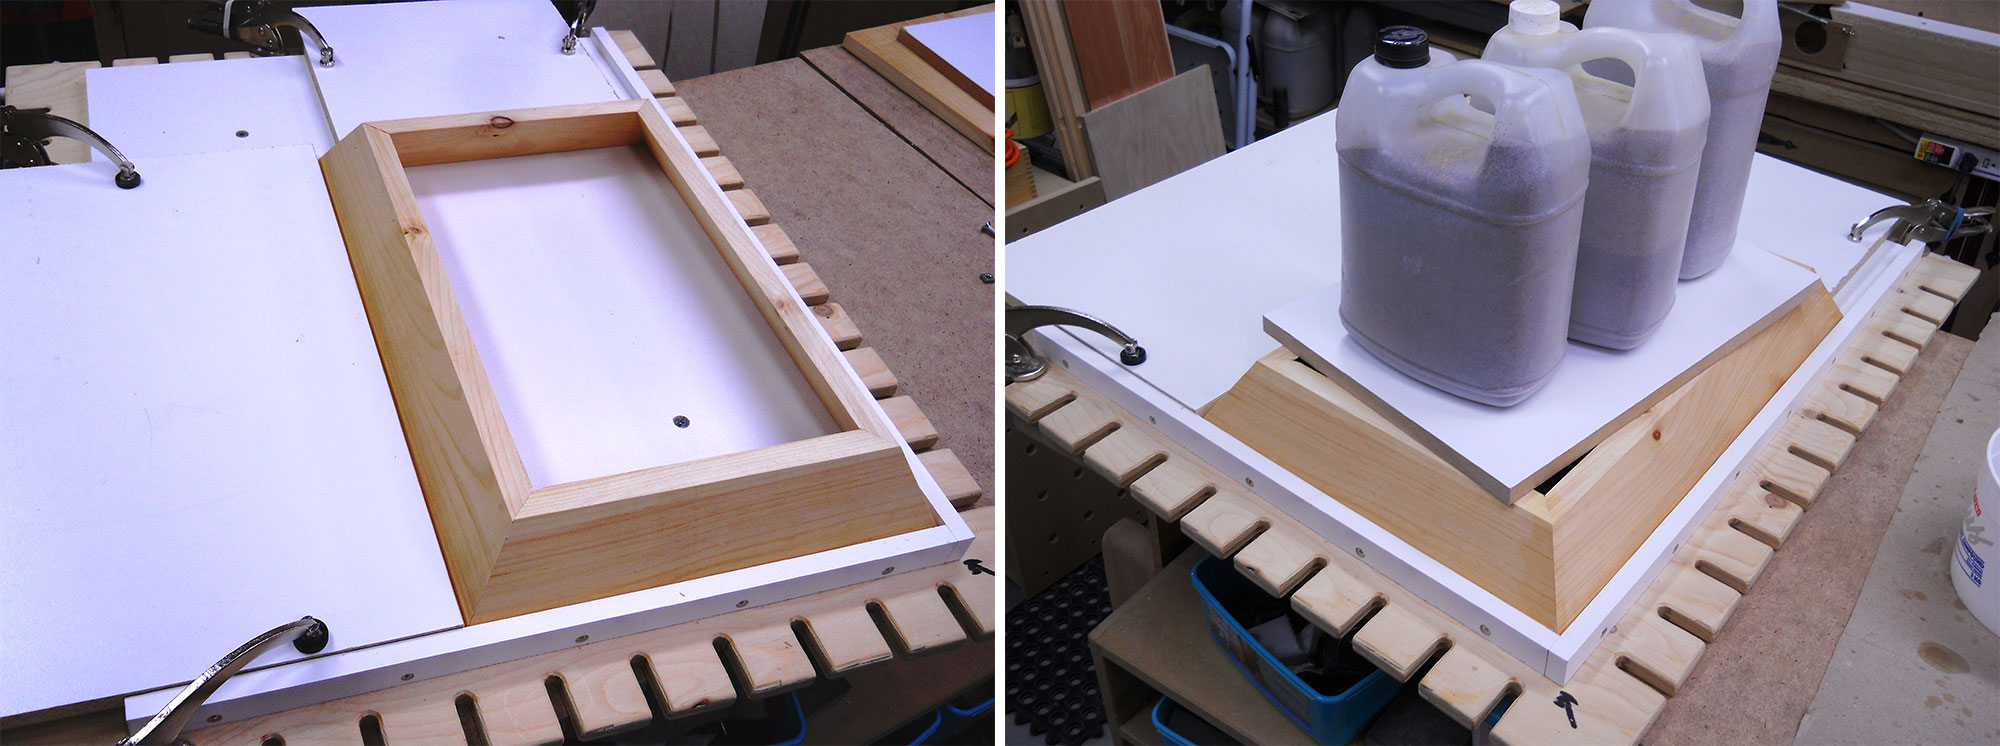 Image 1: Glue up in assembly jig. Image 2: Applying weight to secure glue-up in place.